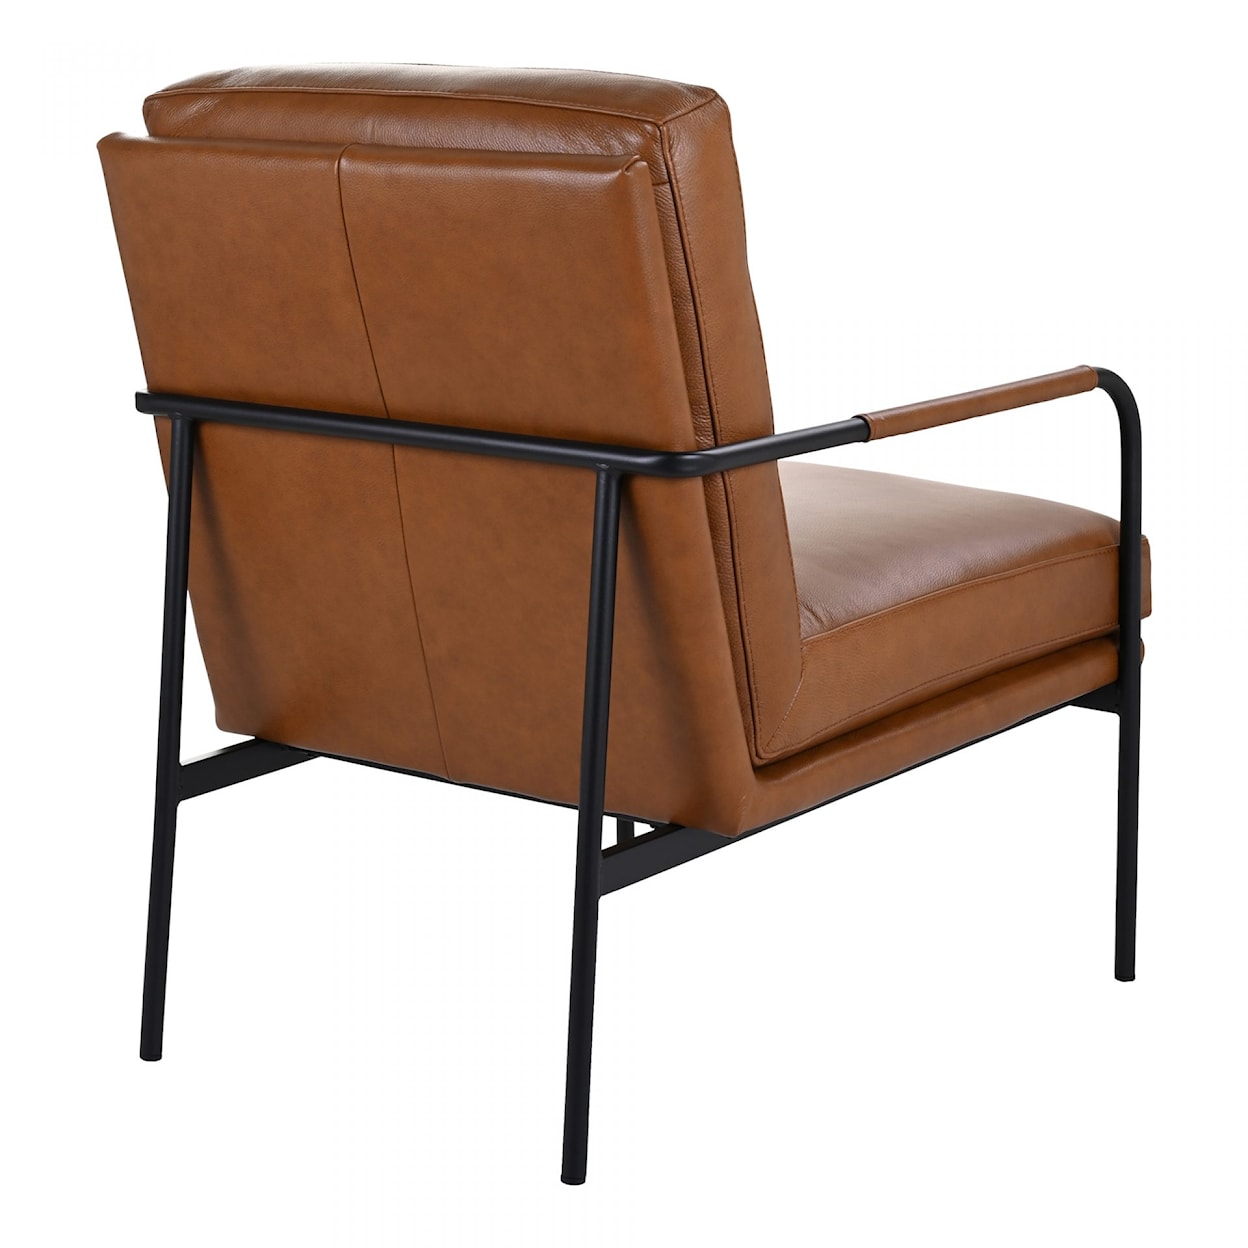 Moe's Home Collection Verlaine Chair Chestnut Brown